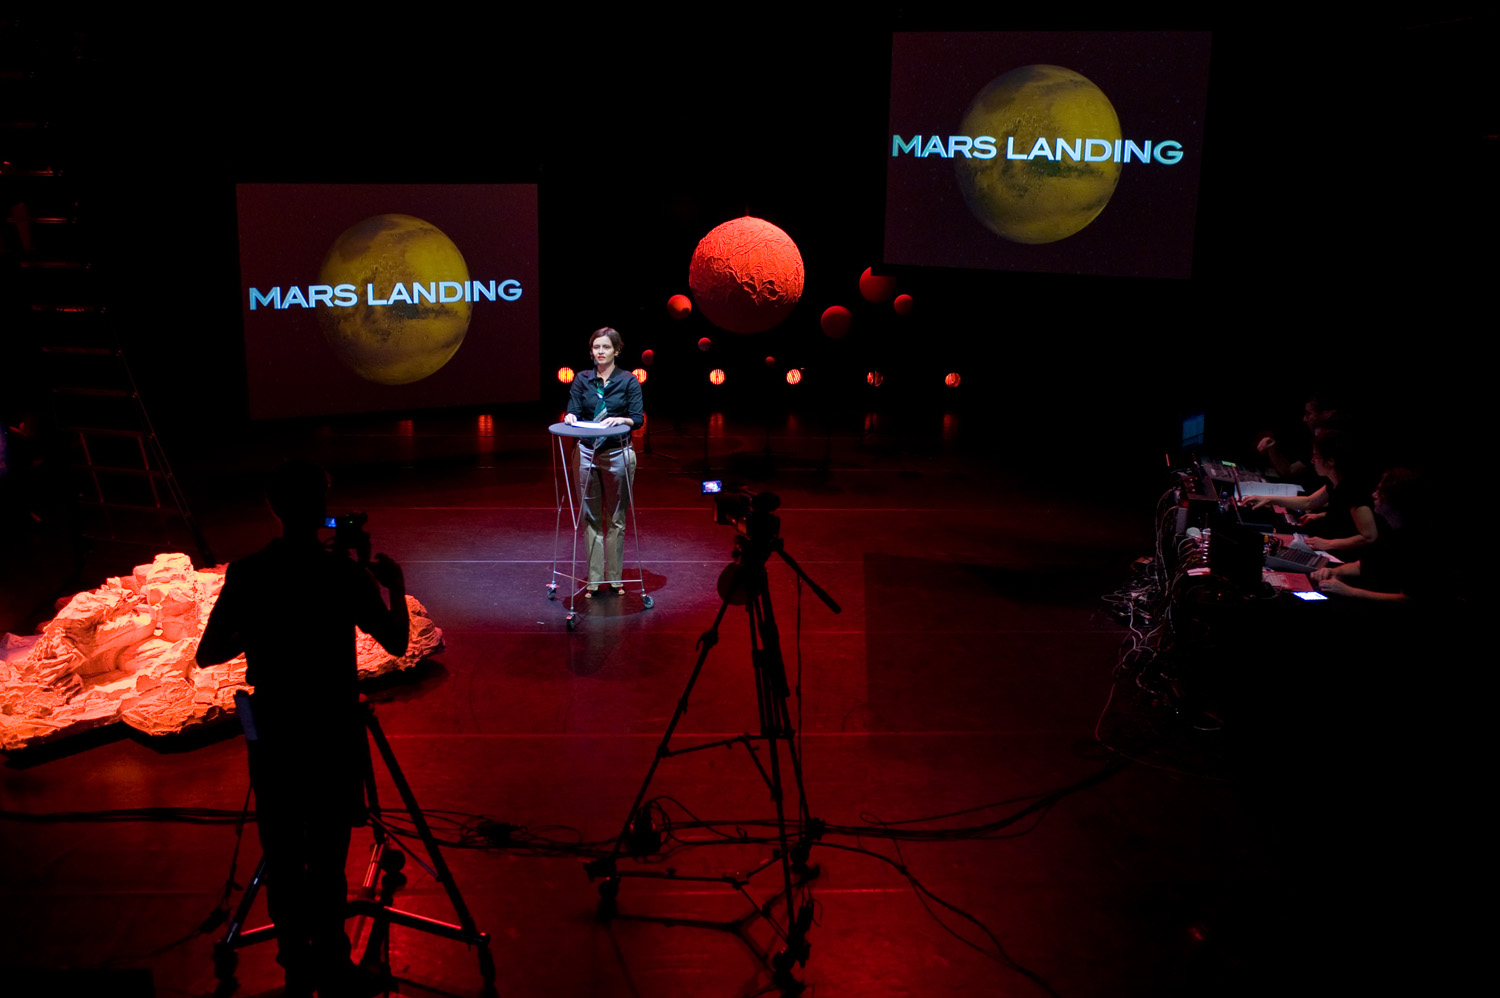 Mars Landing by Andrea Bozic in collaboration with Julia Willms